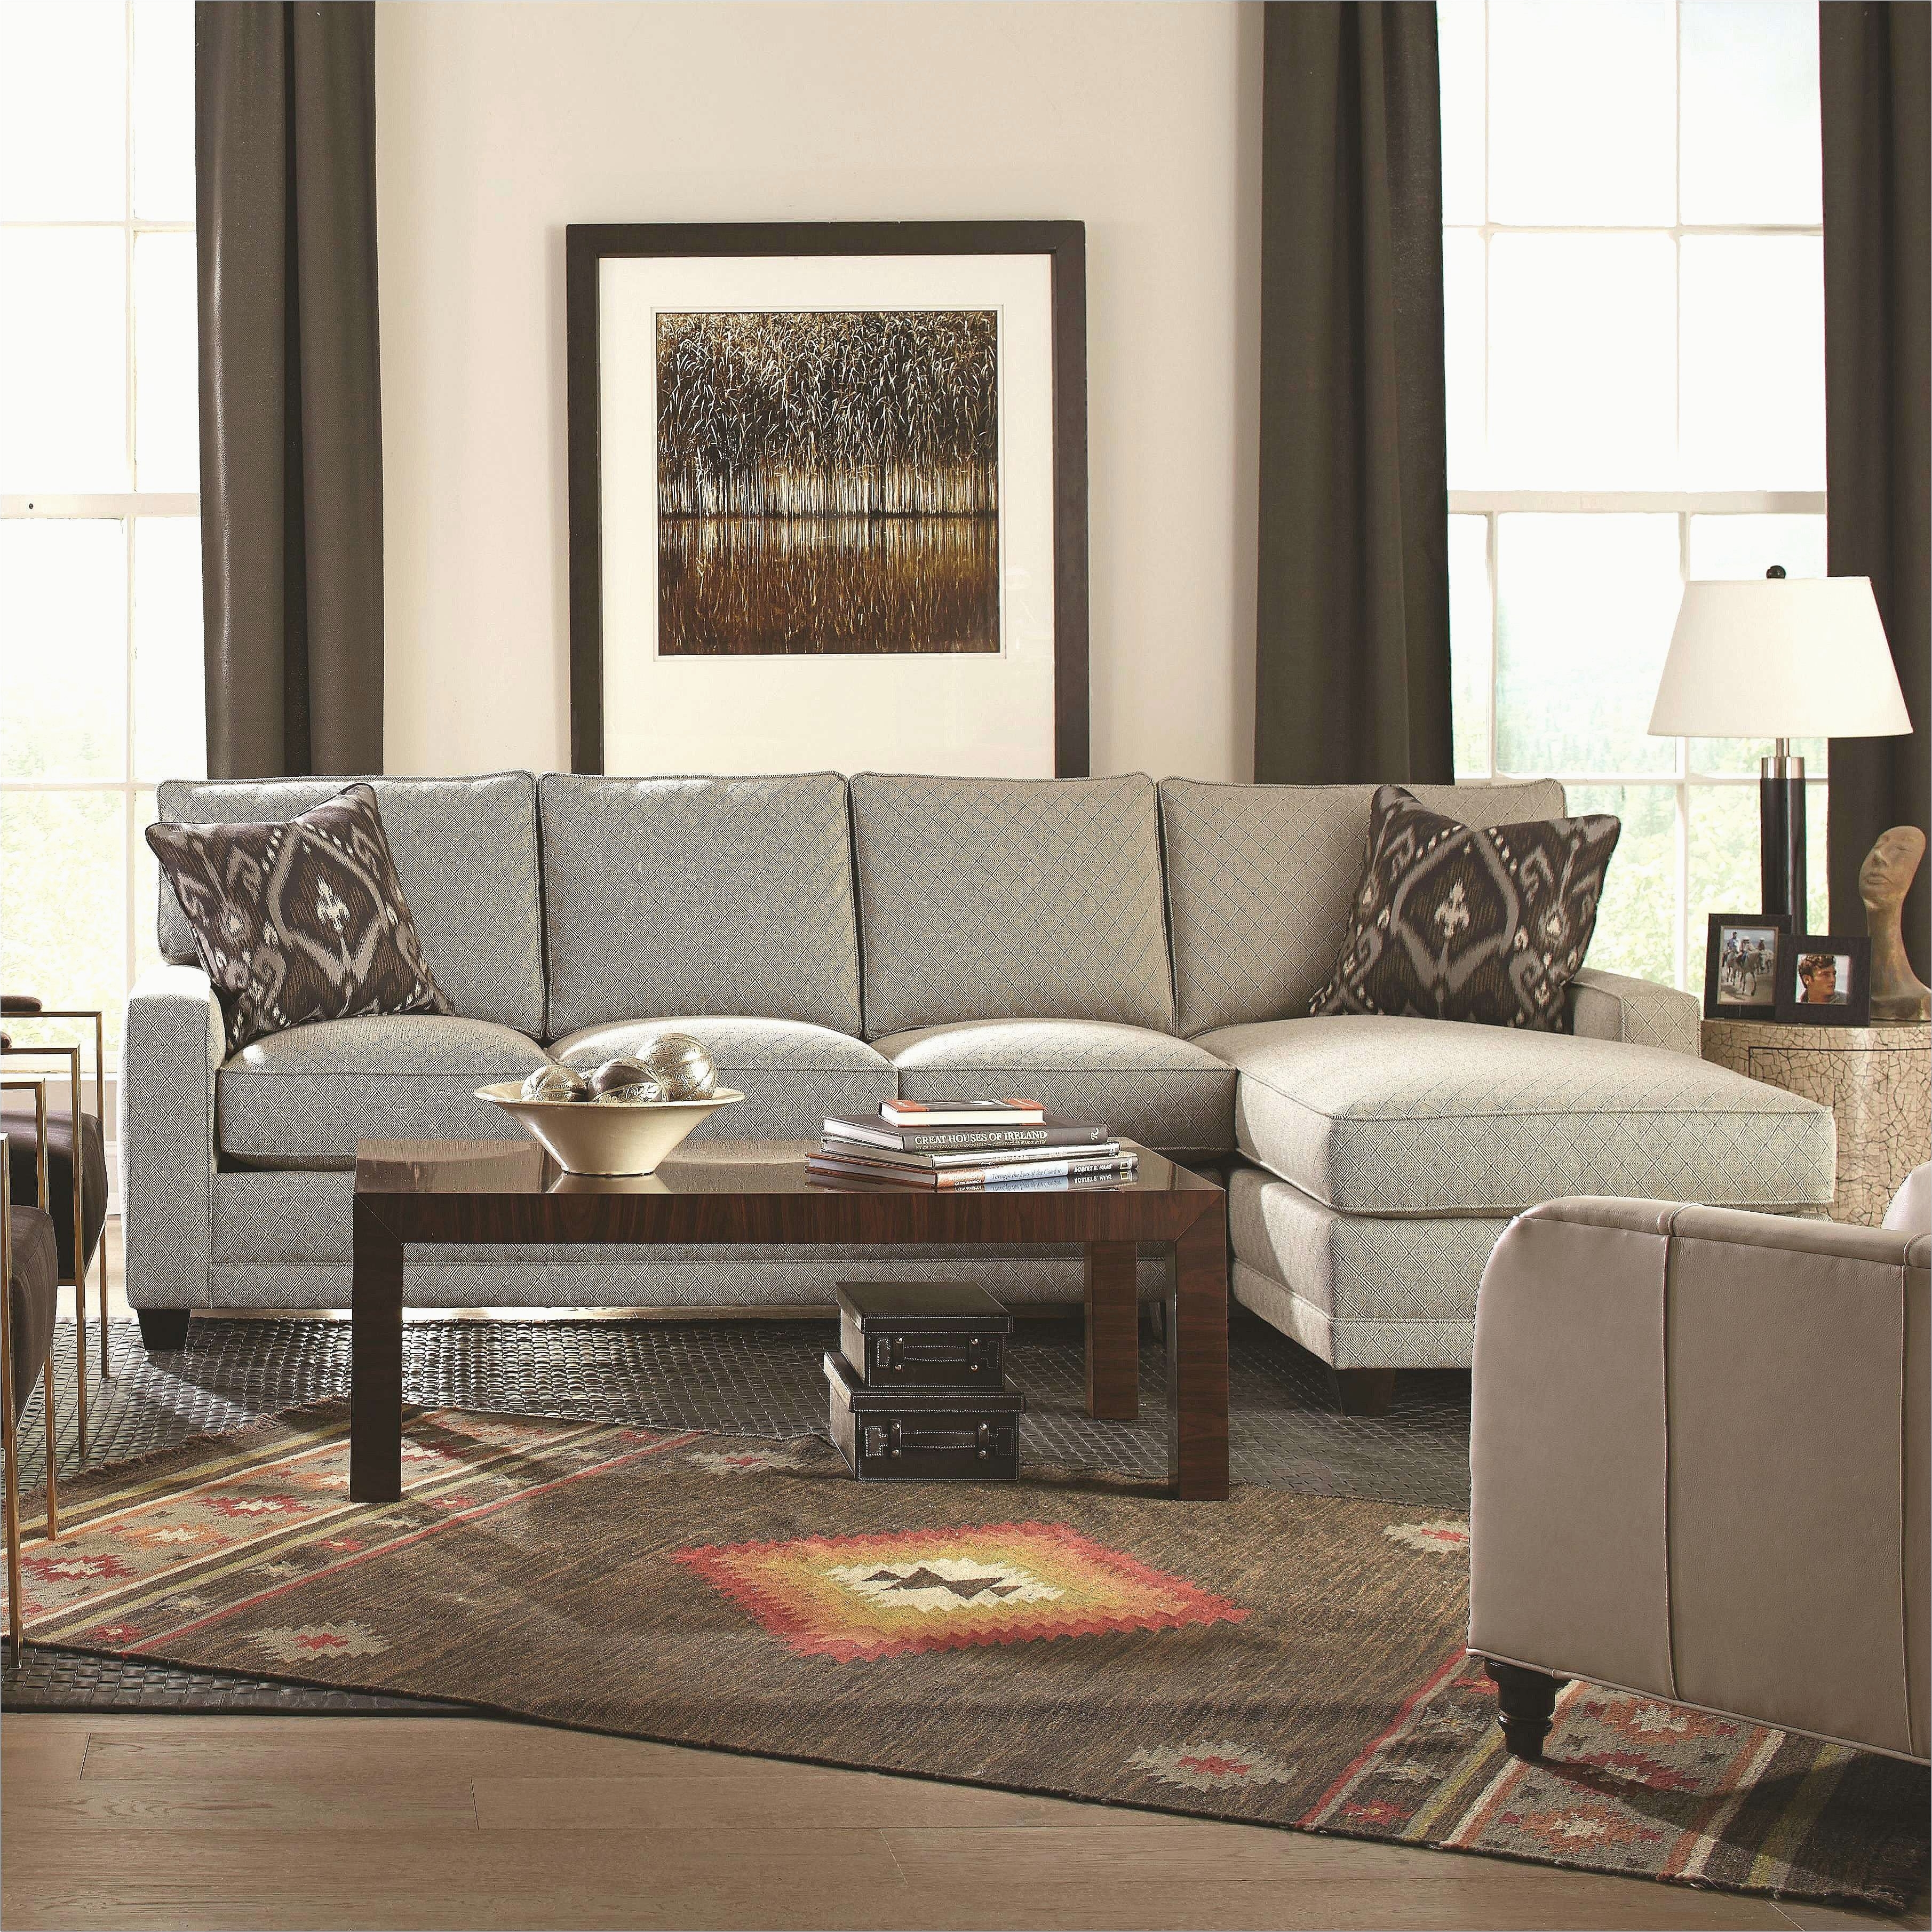 astounding conns living room furniture on 35 awesome macys furniture sofa s home furniture ideas